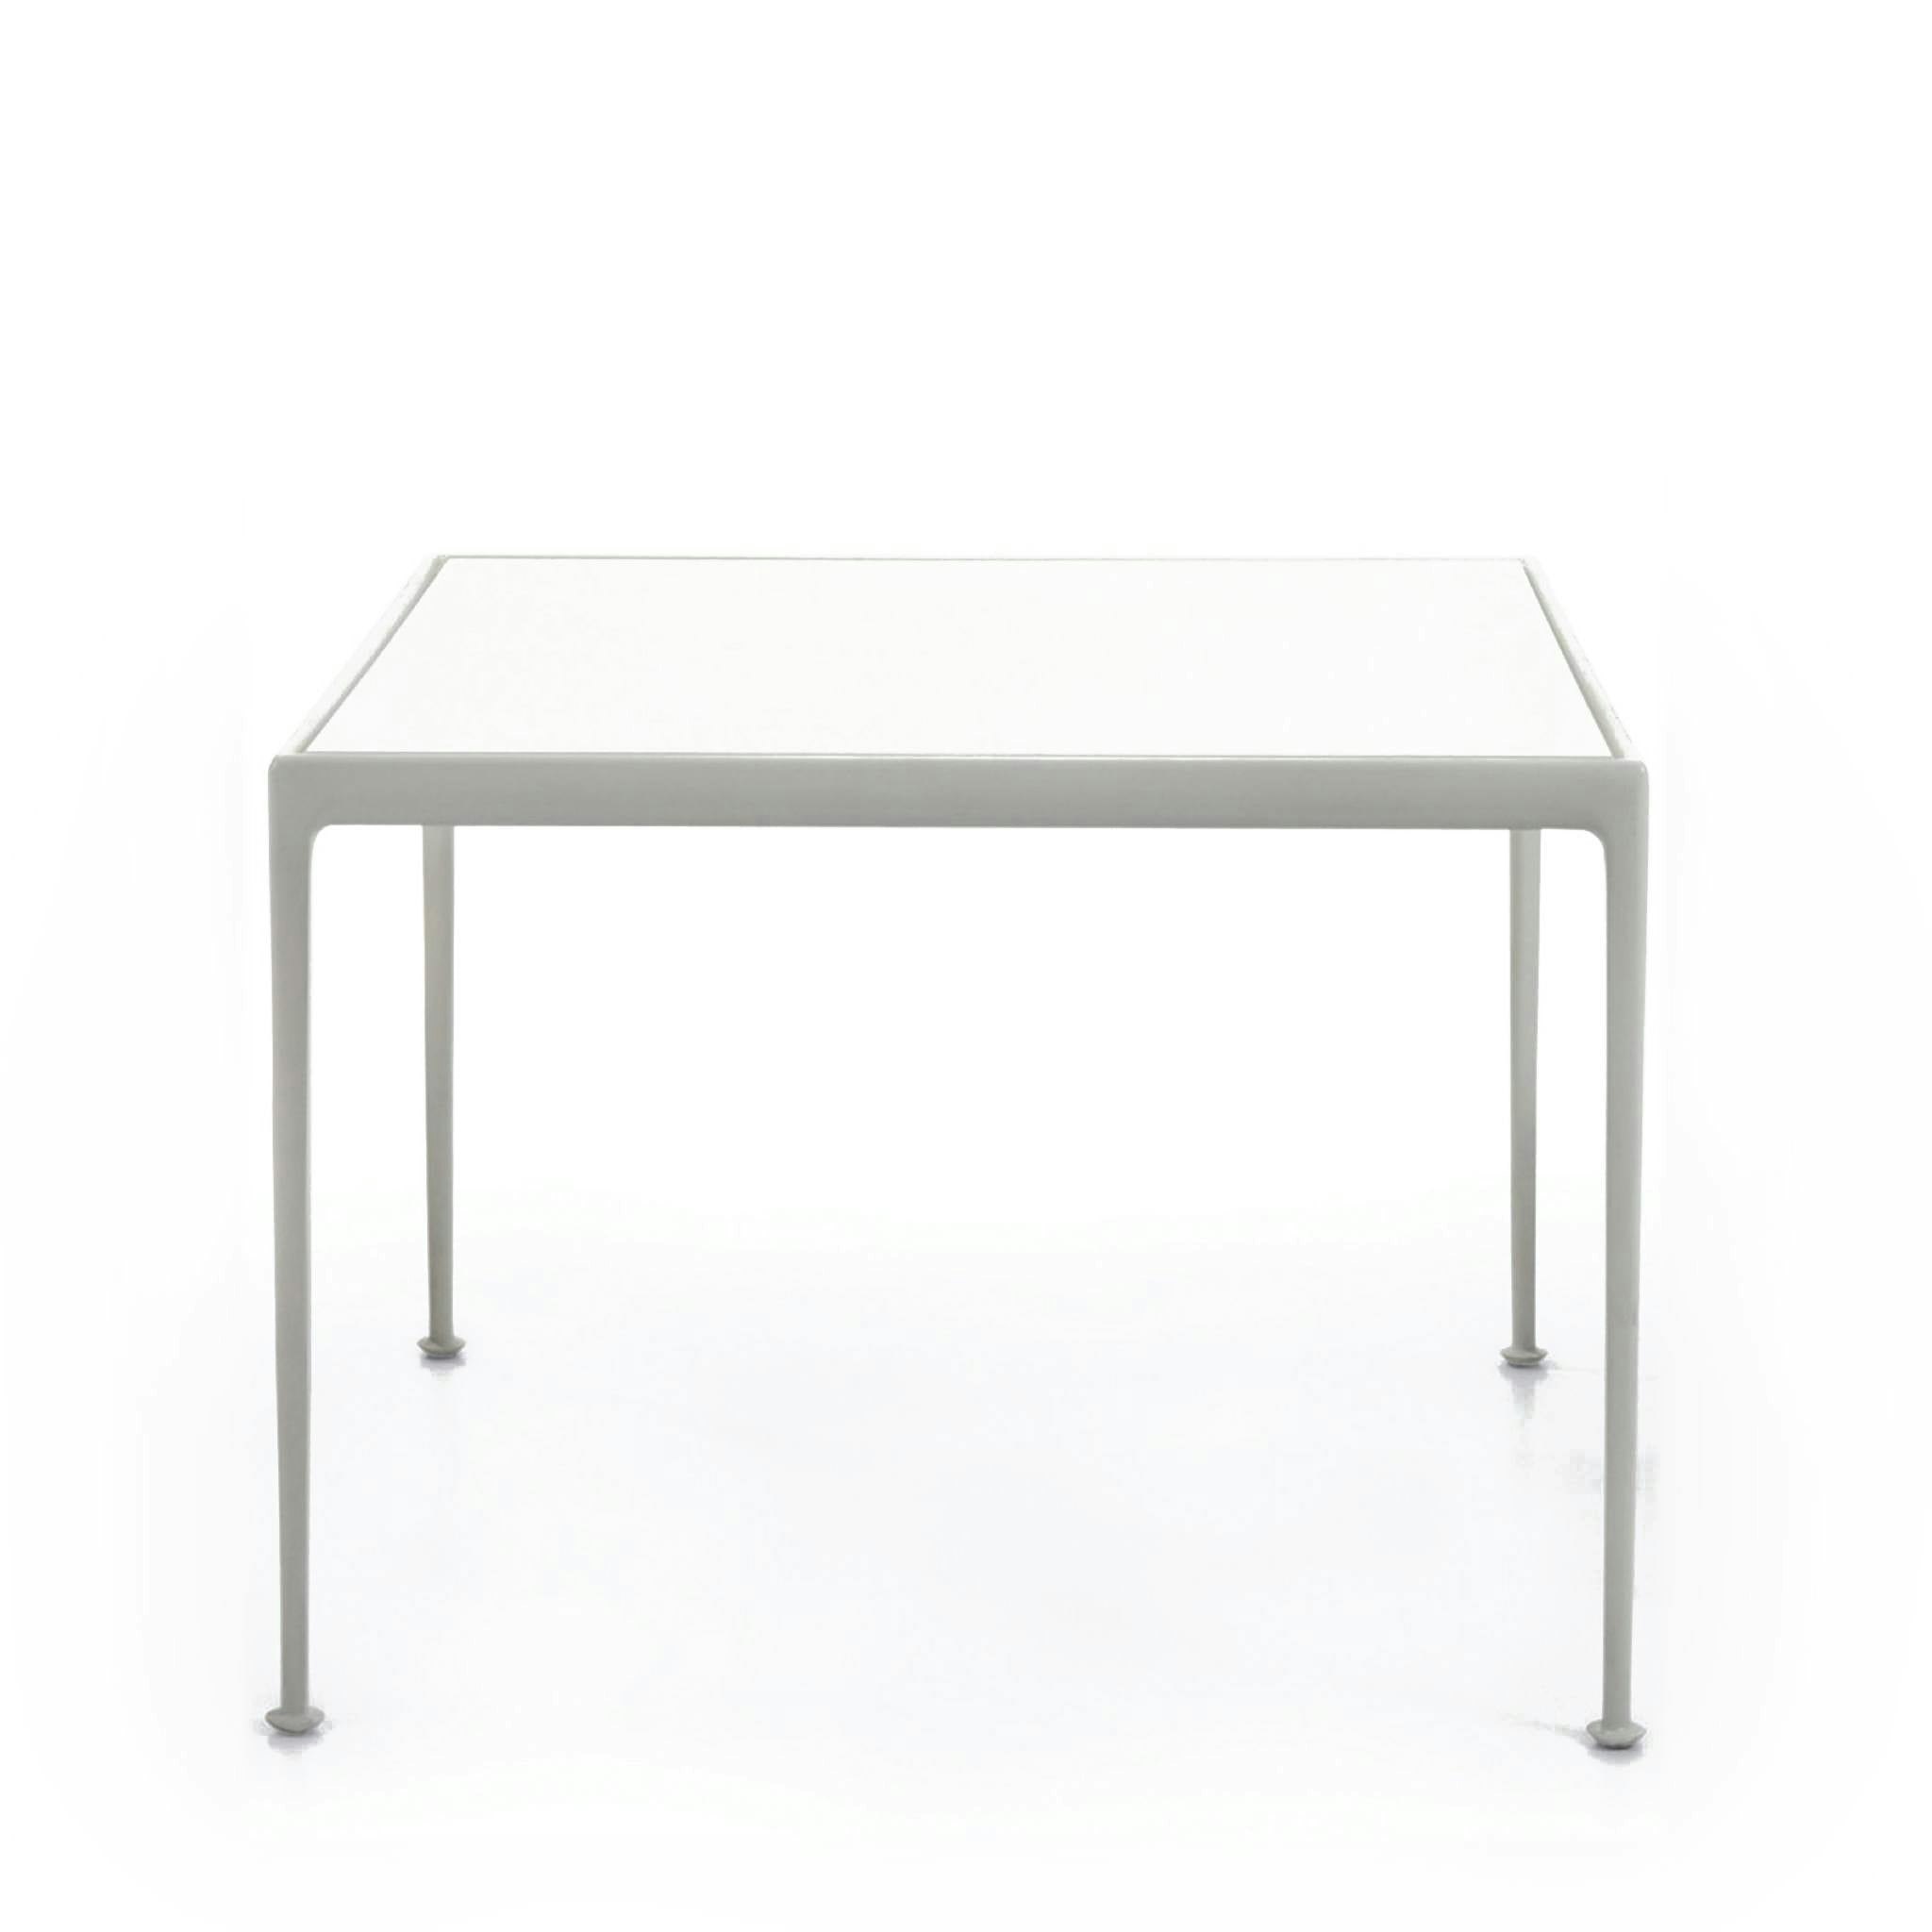 1966 Square Dining Table by Knoll